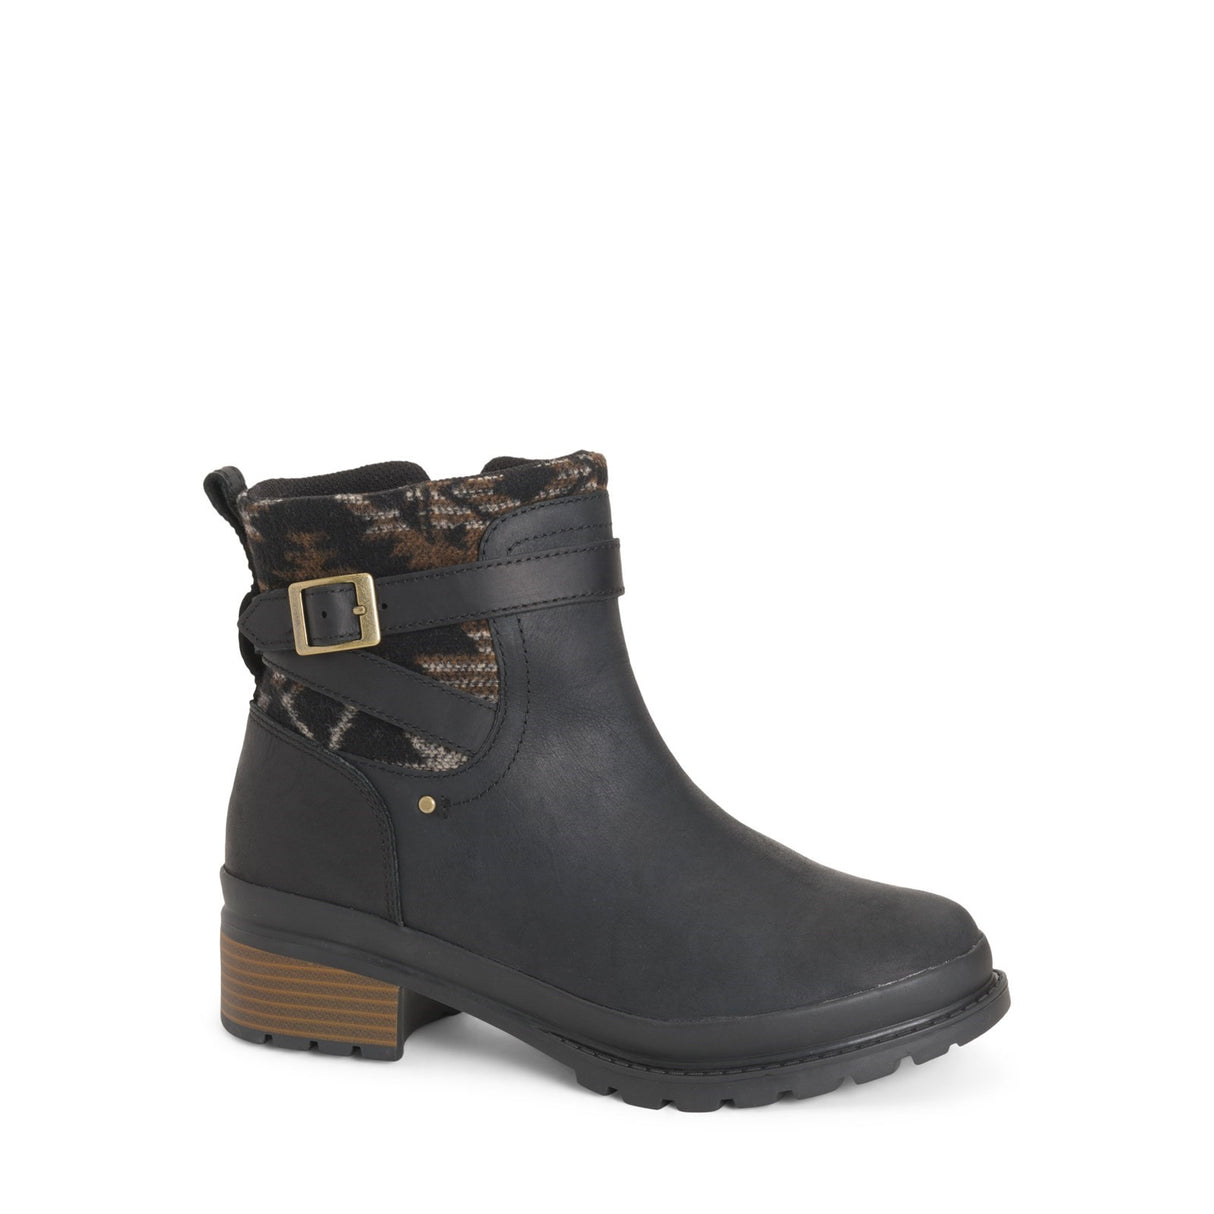 Muck Boot Liberty Ankle Supreme Boots